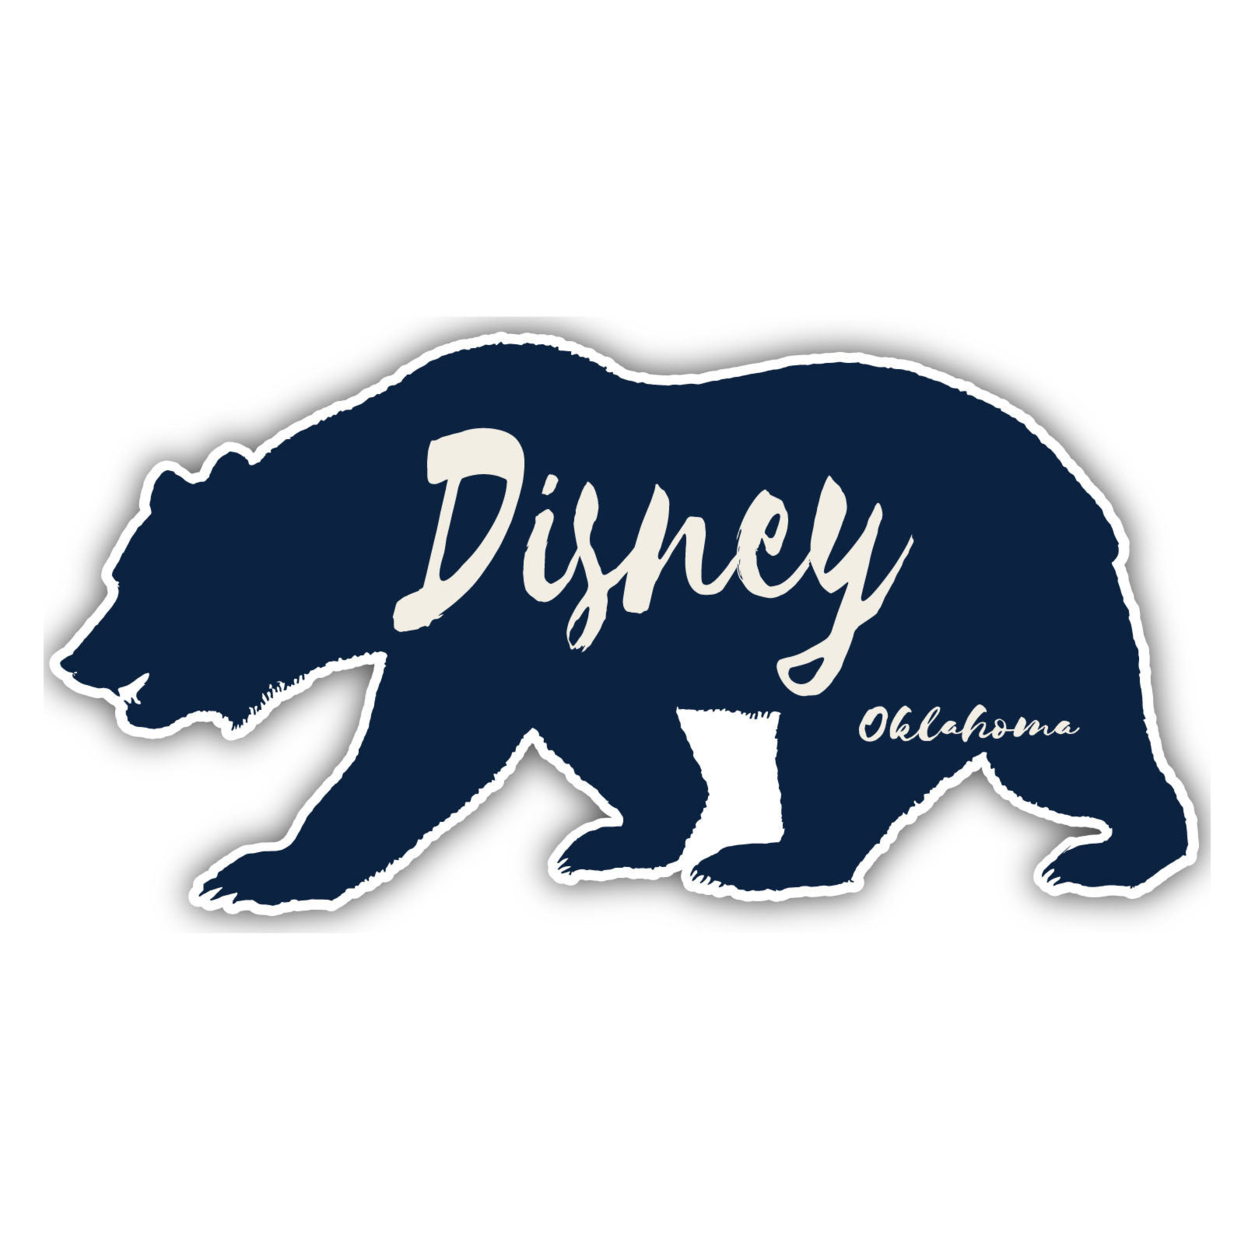 Disney Oklahoma Souvenir Decorative Stickers (Choose Theme And Size) - 4-Pack, 8-Inch, Great Outdoors